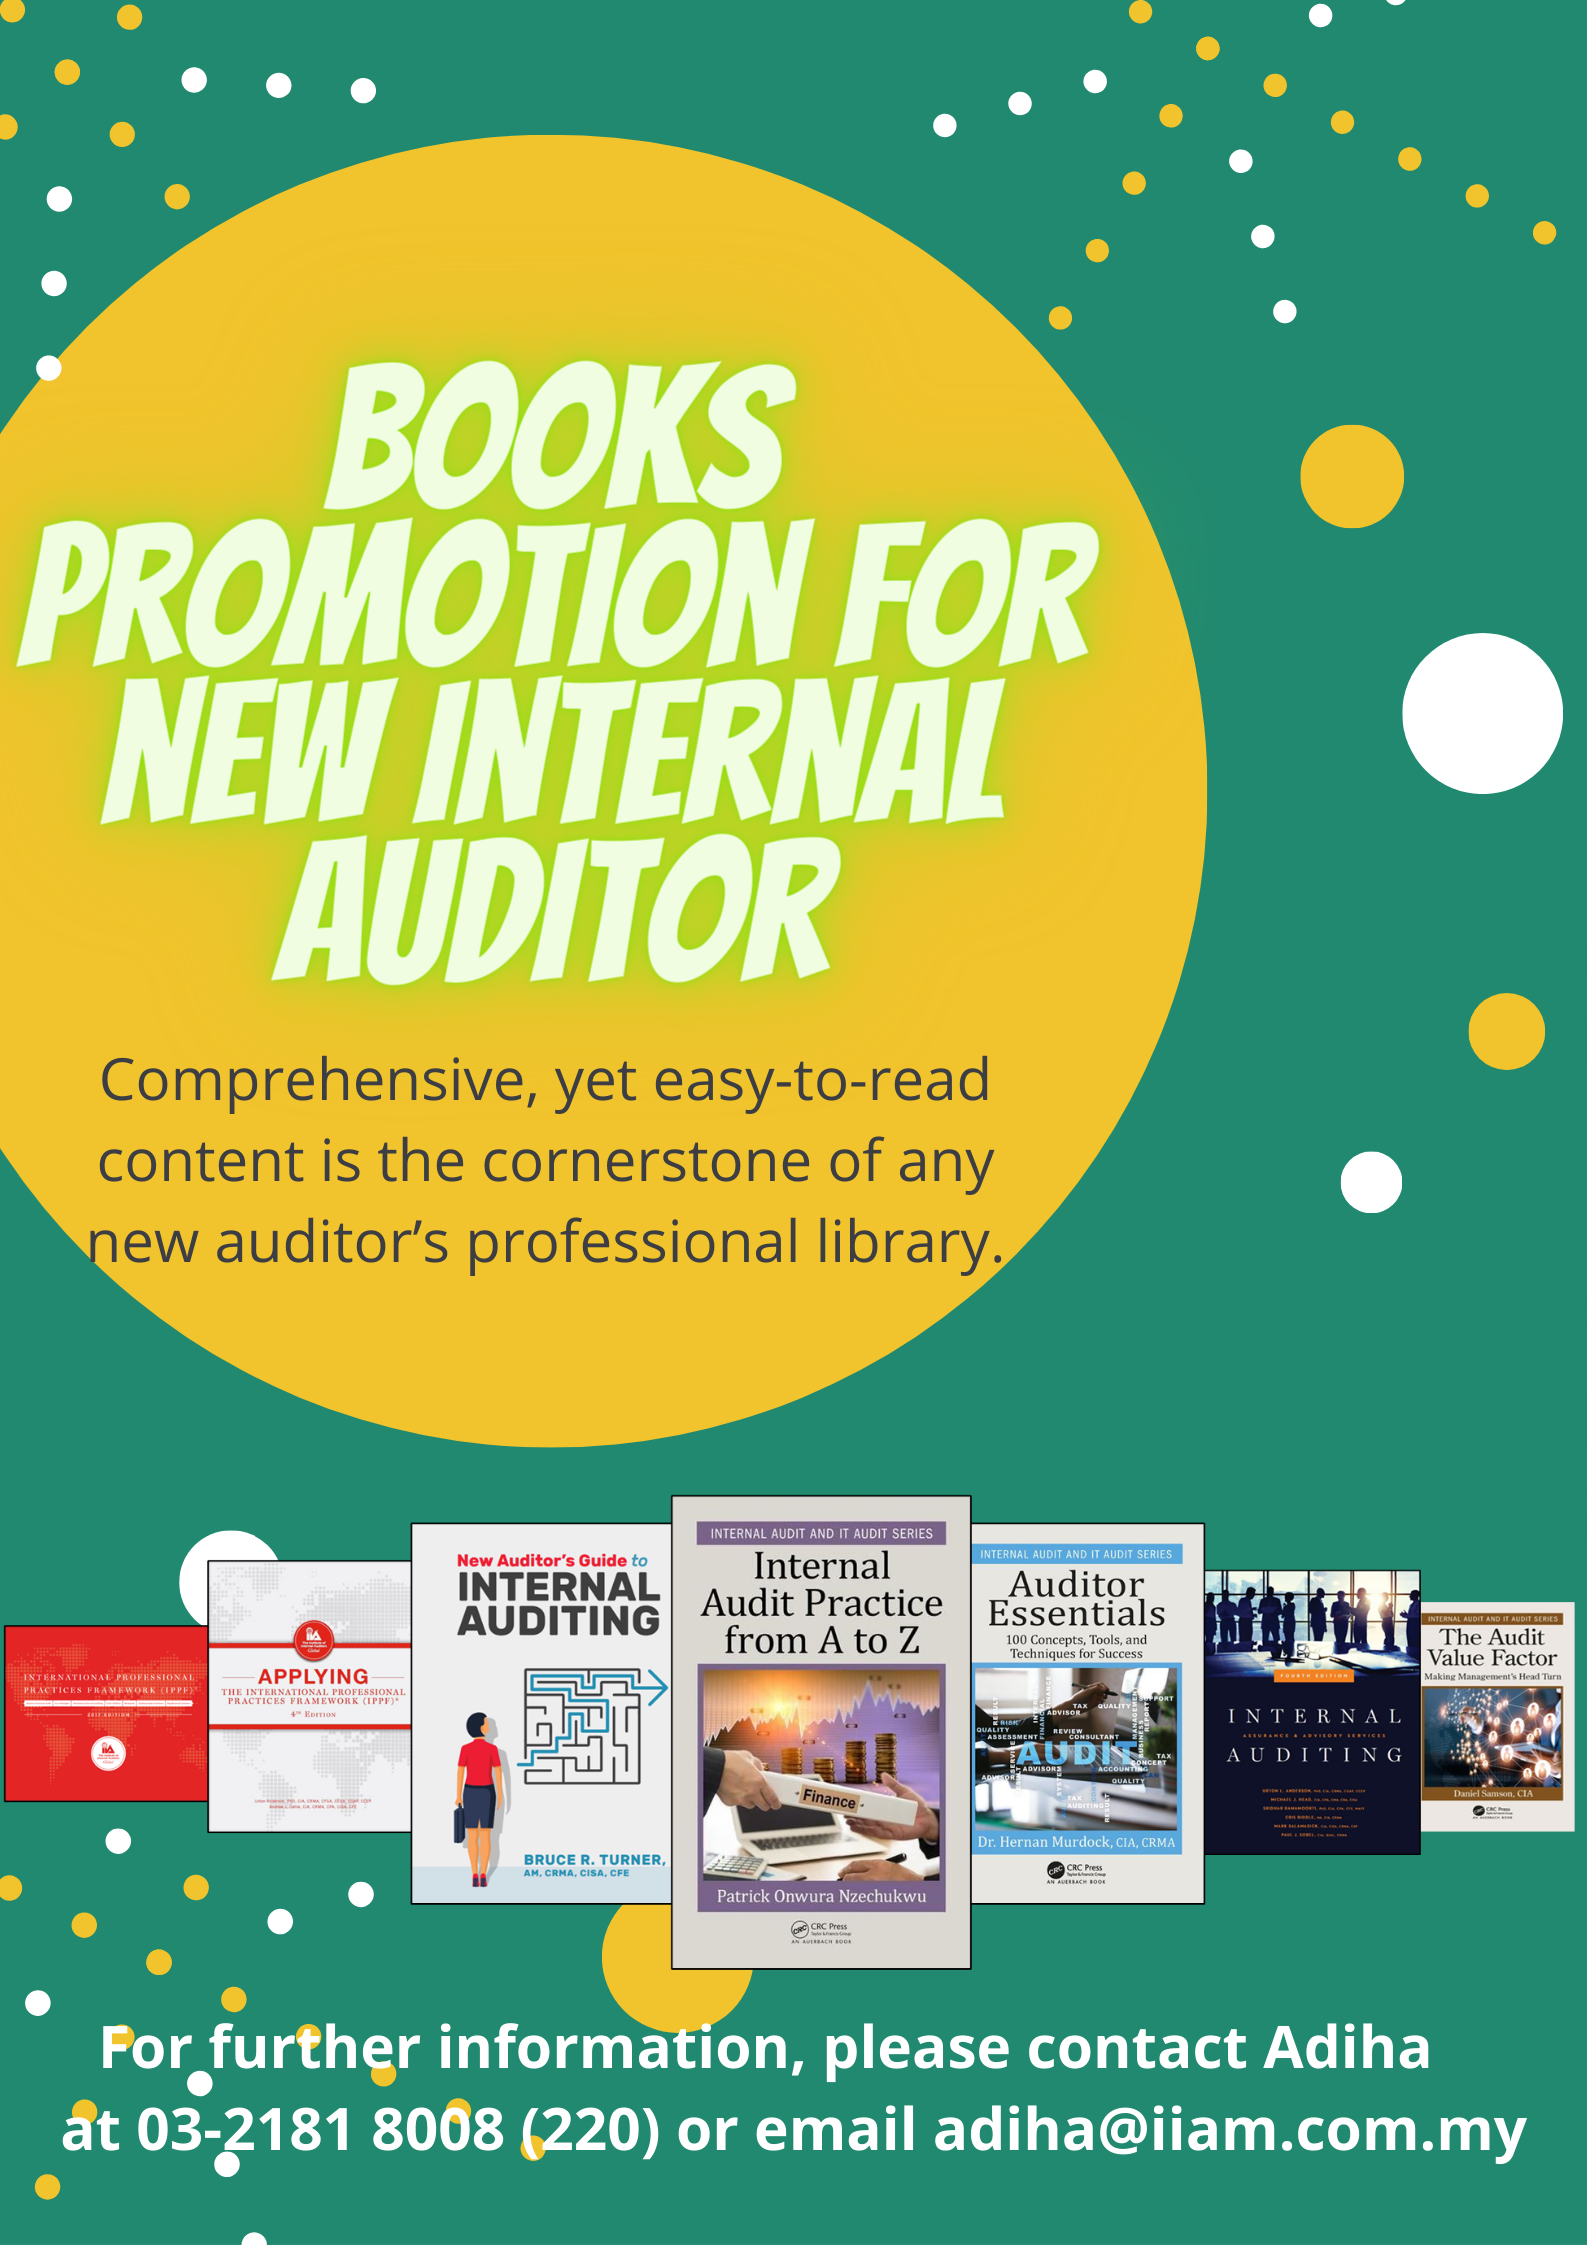 Books Promotion for New Internal Auditor